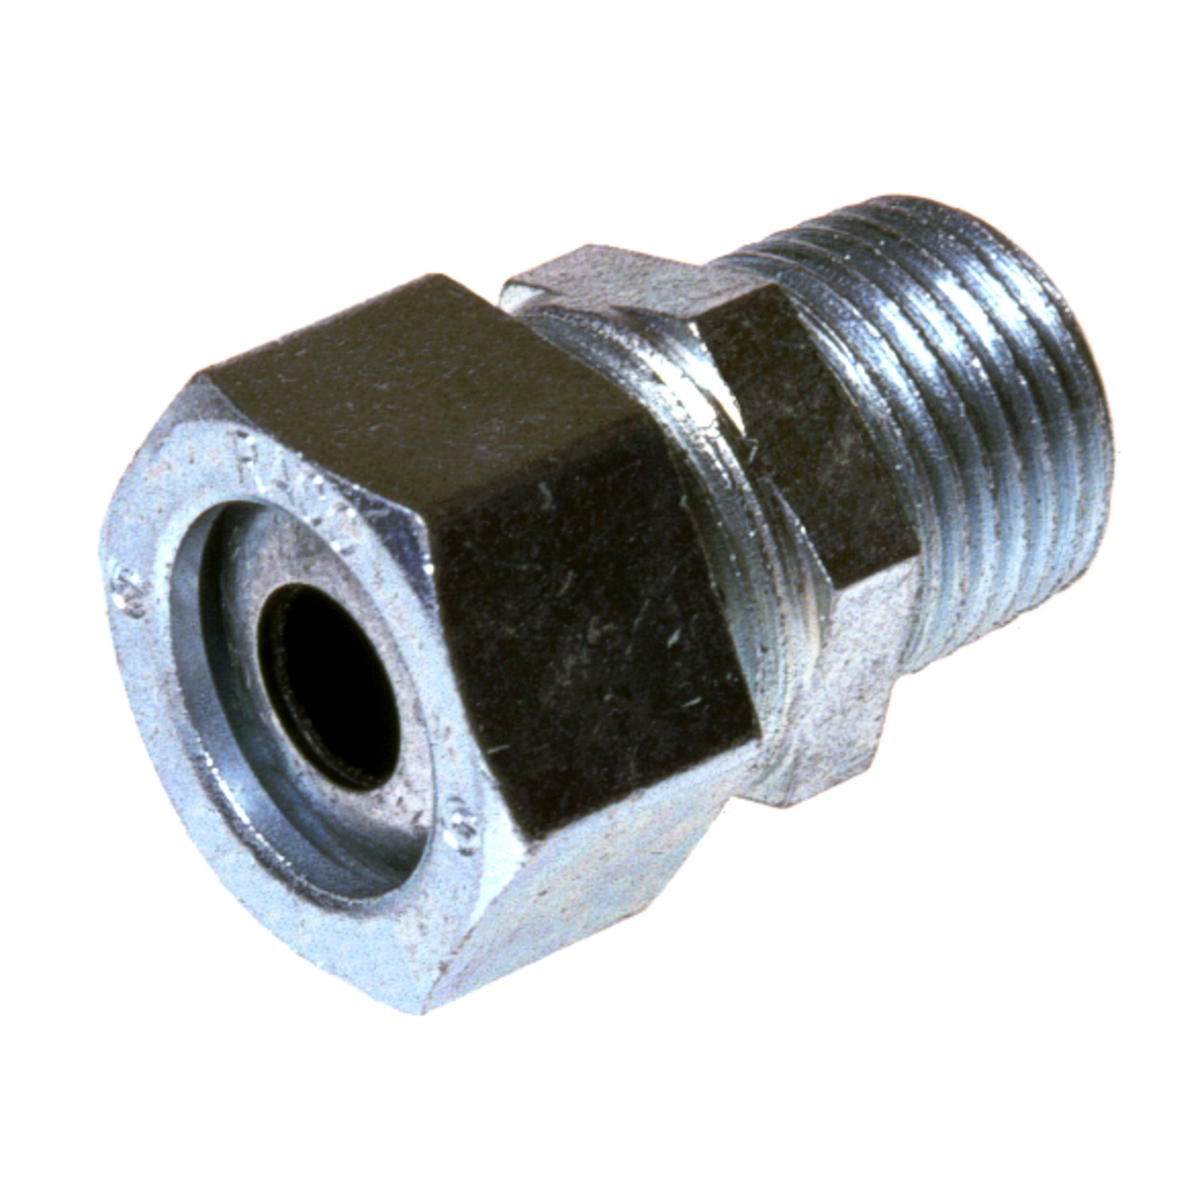 1/2 IN STRAIGHT STRAIN RELIEF CORD CONNECTORS STEEL/MALLEABLE IRON, .500 - .600IN. CABLE RANGES, FORM 2